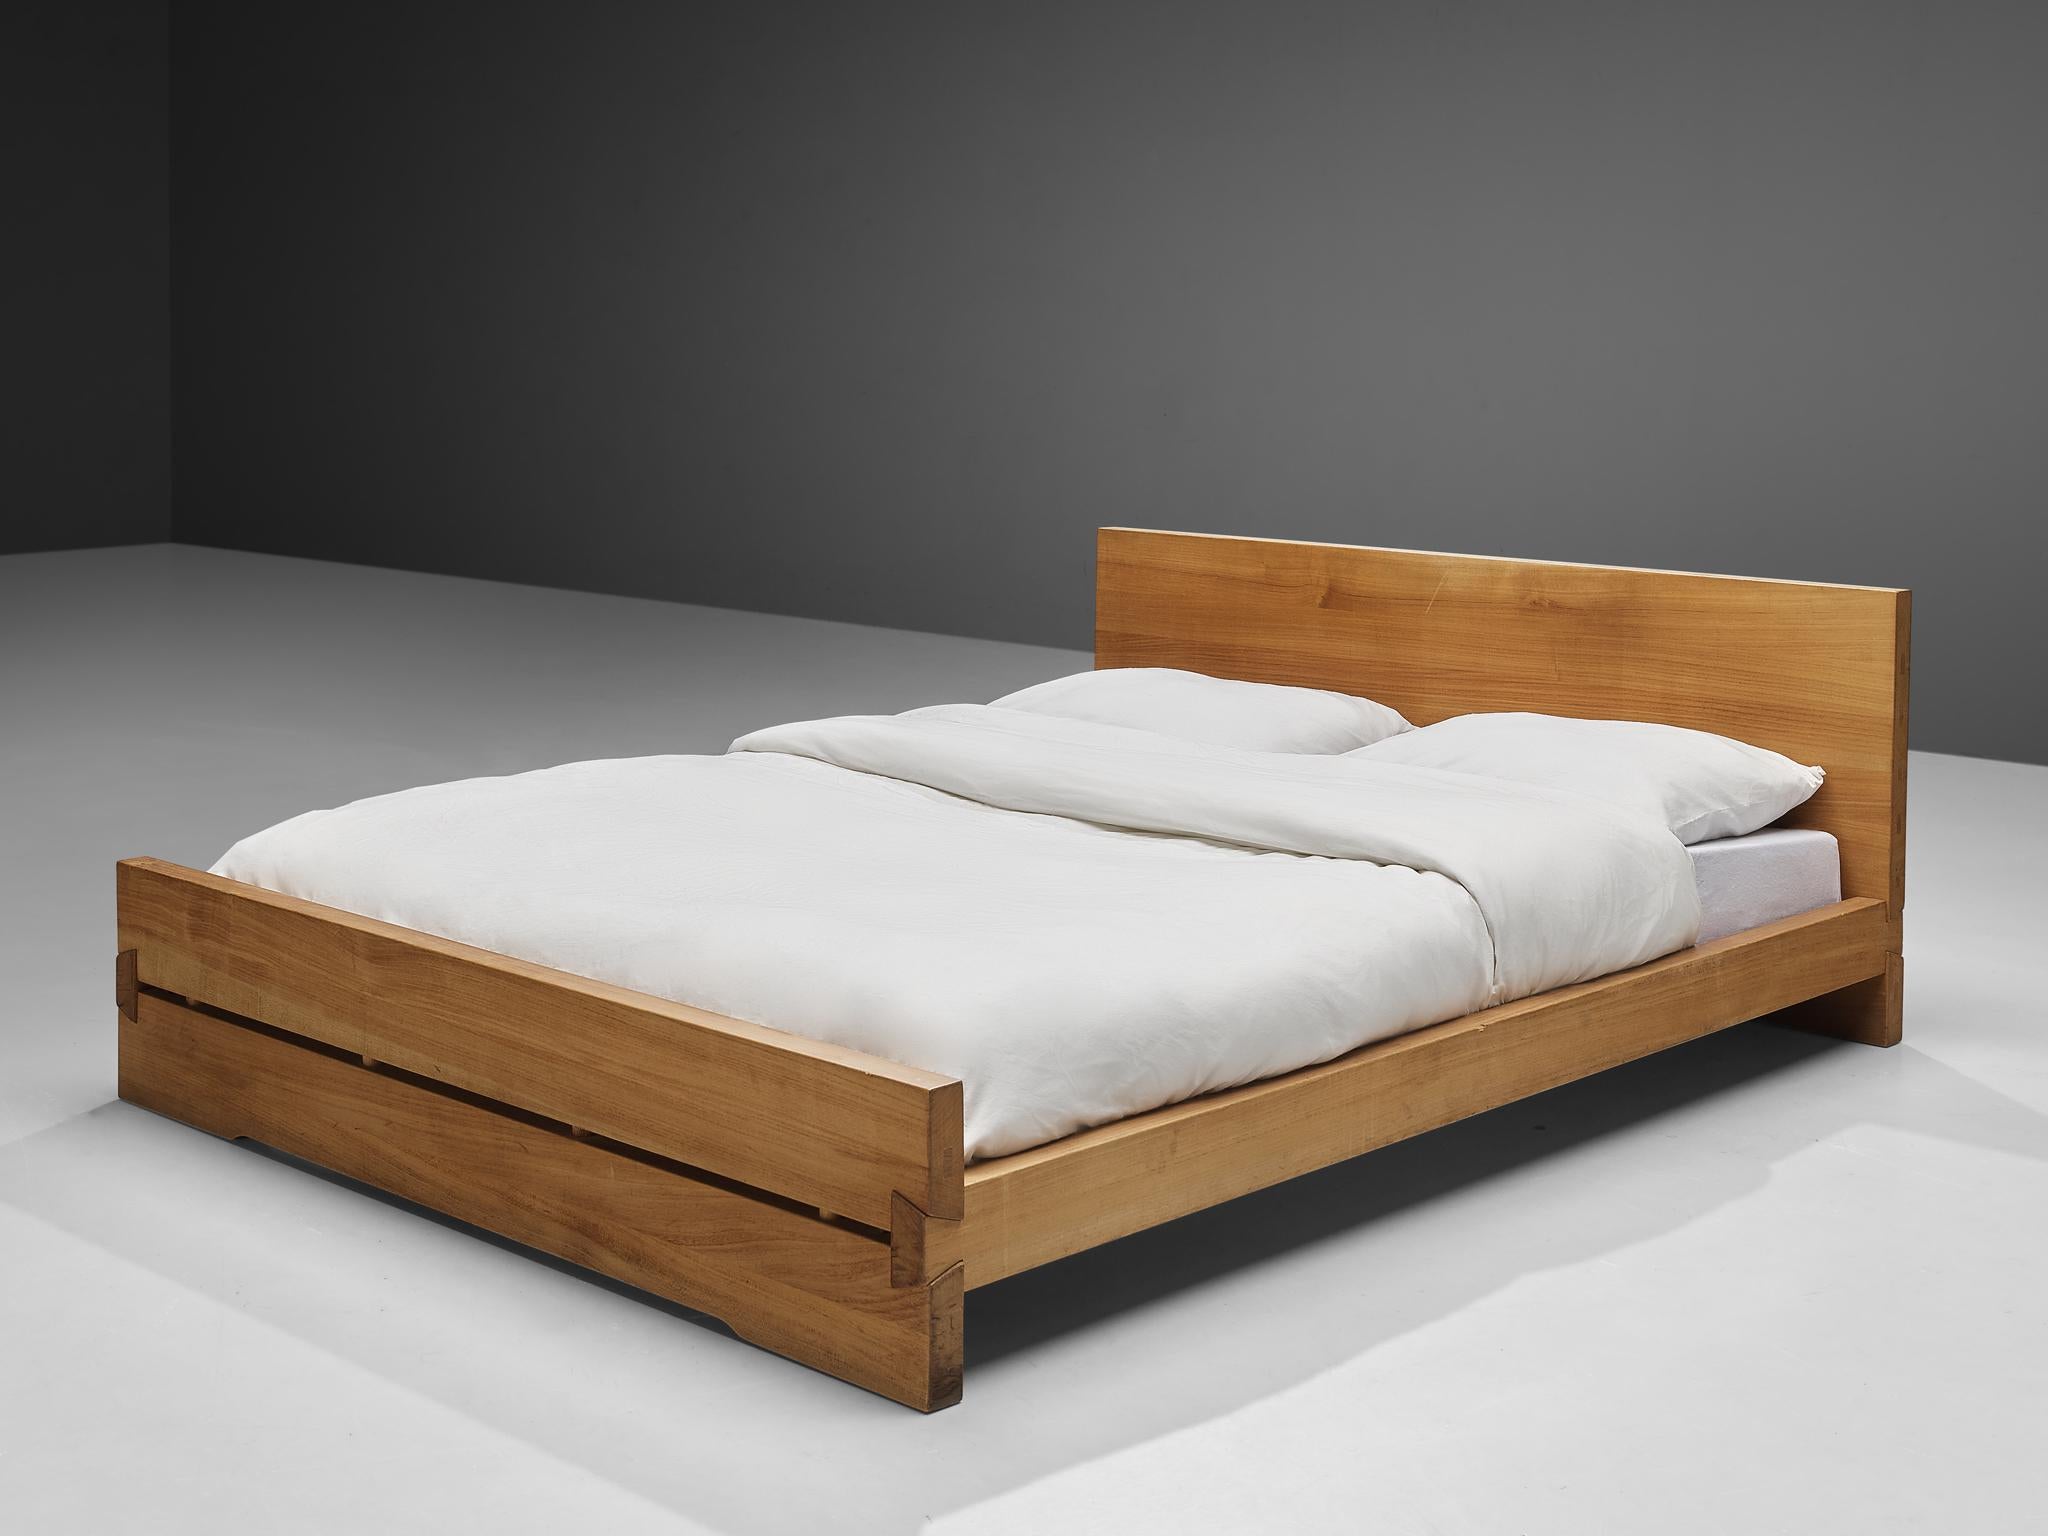 Pierre Chapo, bed 'Louis' model L02C, elm, France, 1960s

This bed is designed by Pierre Chapo in the 1960s. It features the handcrafted joints that the woodworker Chapo is known for. The bed holds a tall headboard and a lower foot end. They are